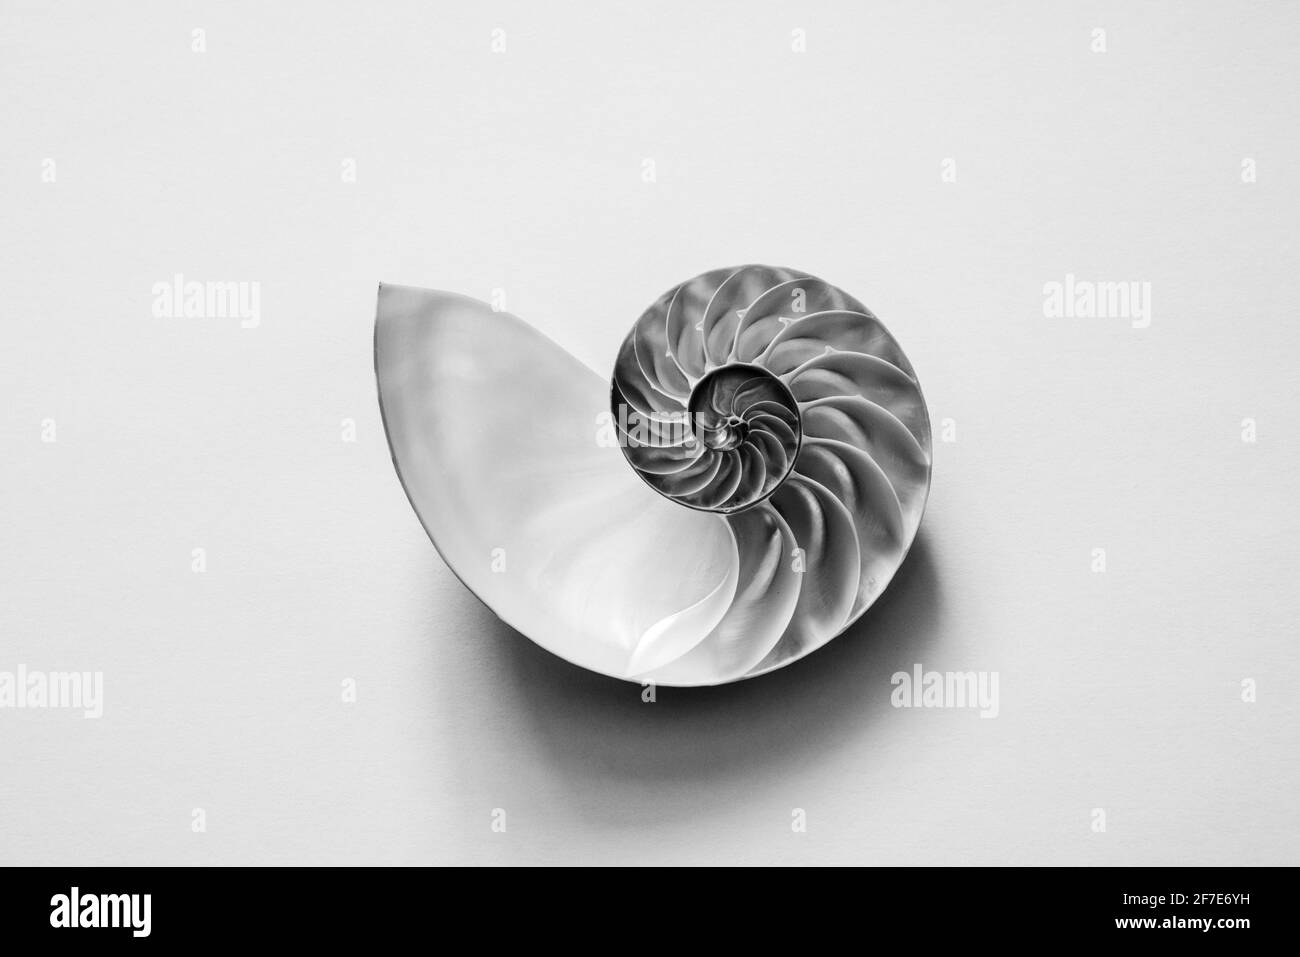 Black and white image of an open half of a nautilus sea shell. Stock Photo